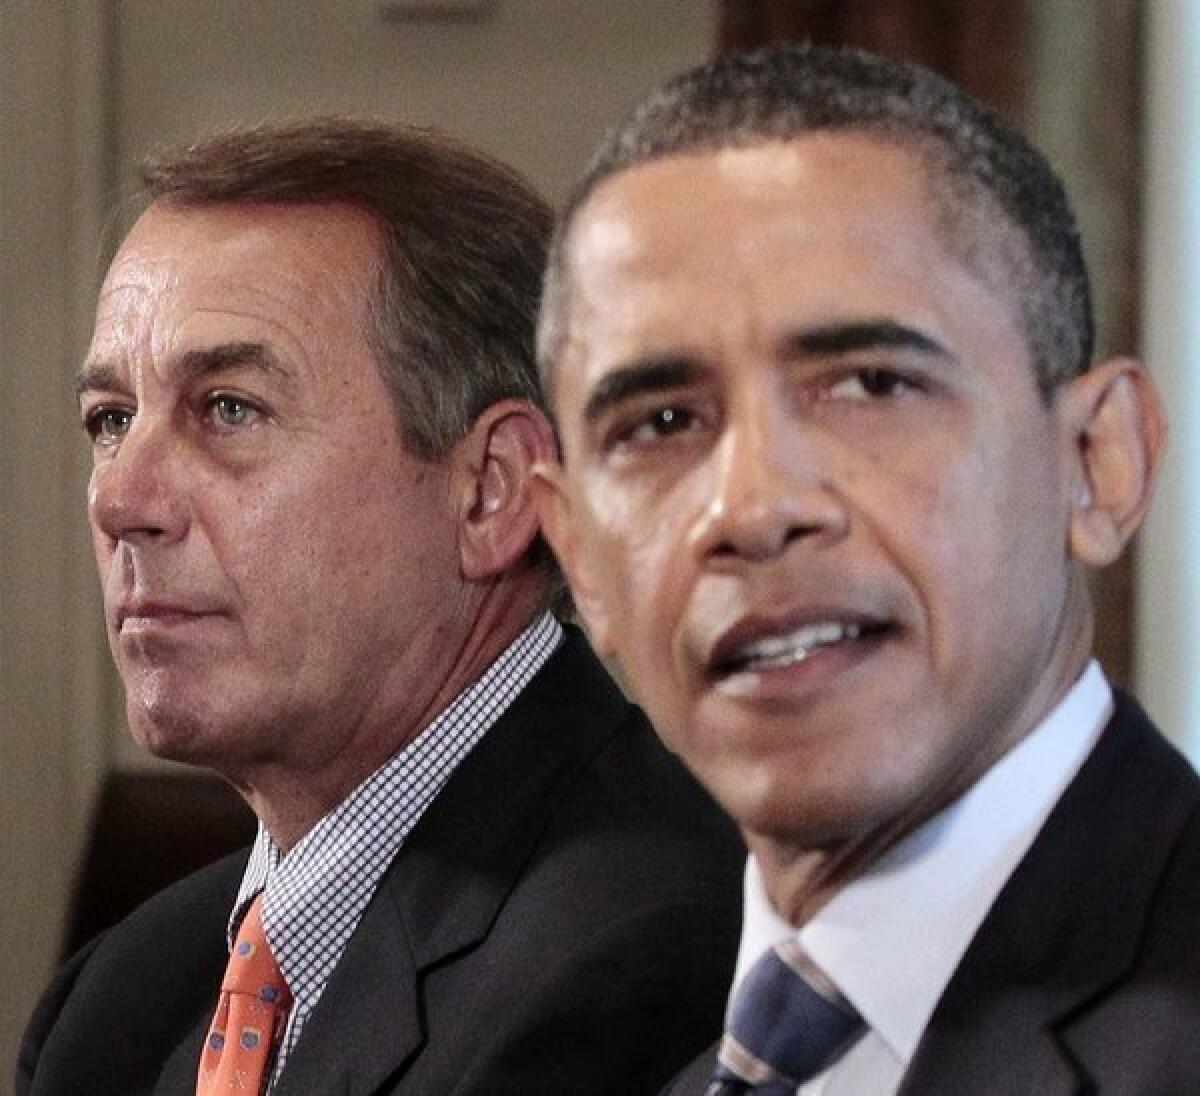 In this photo from July 2011, House Speaker John A. Boehner (R-Ohio) listens as President Obama speaks during a White House meeting with congressional leadership to discuss deficit reduction.